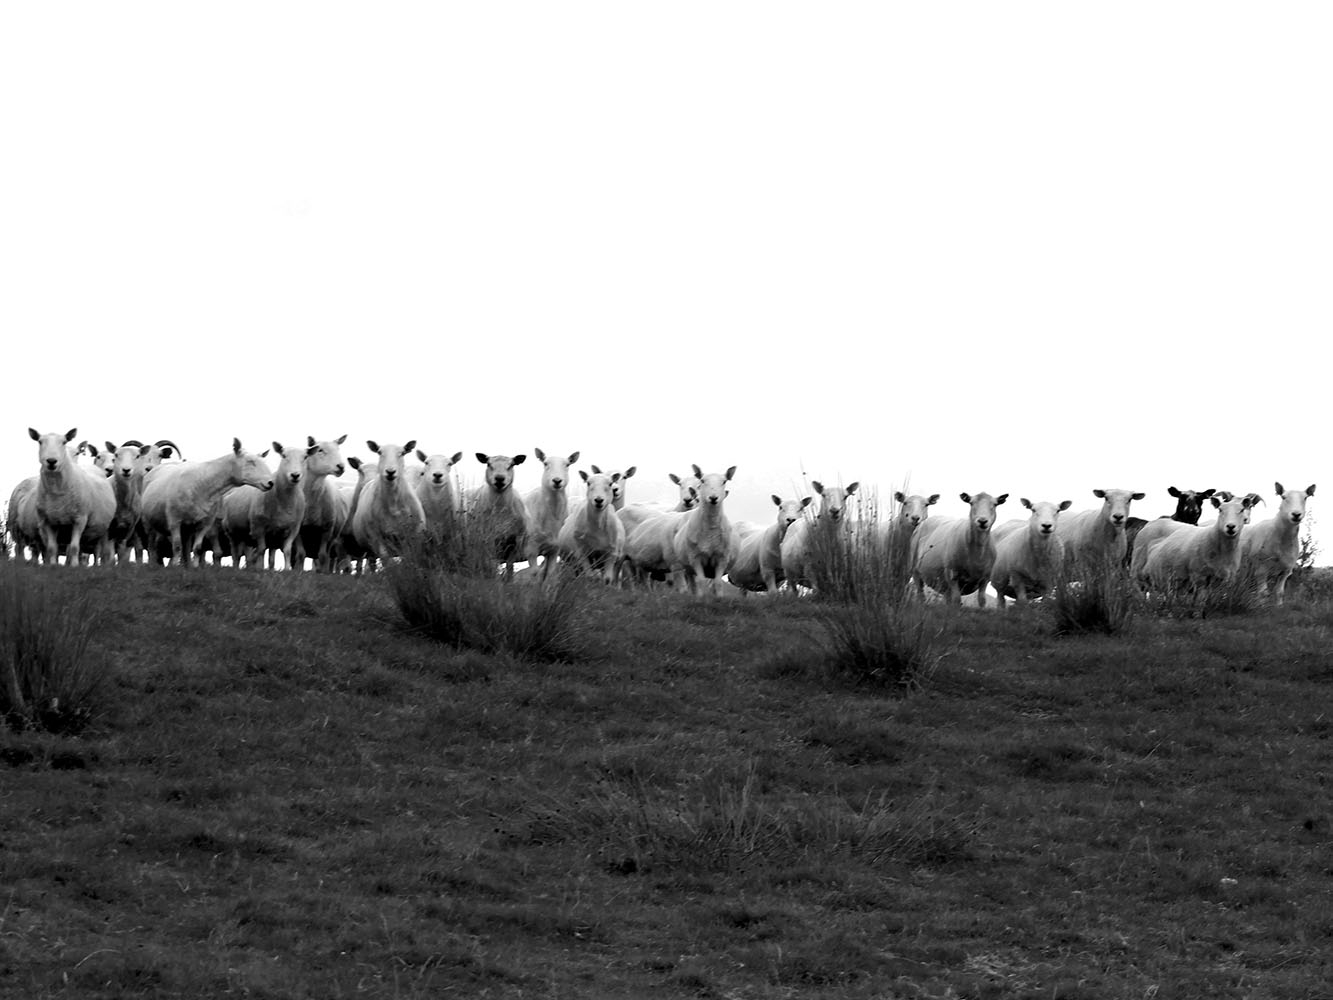 Group of sheep in a field in black and white